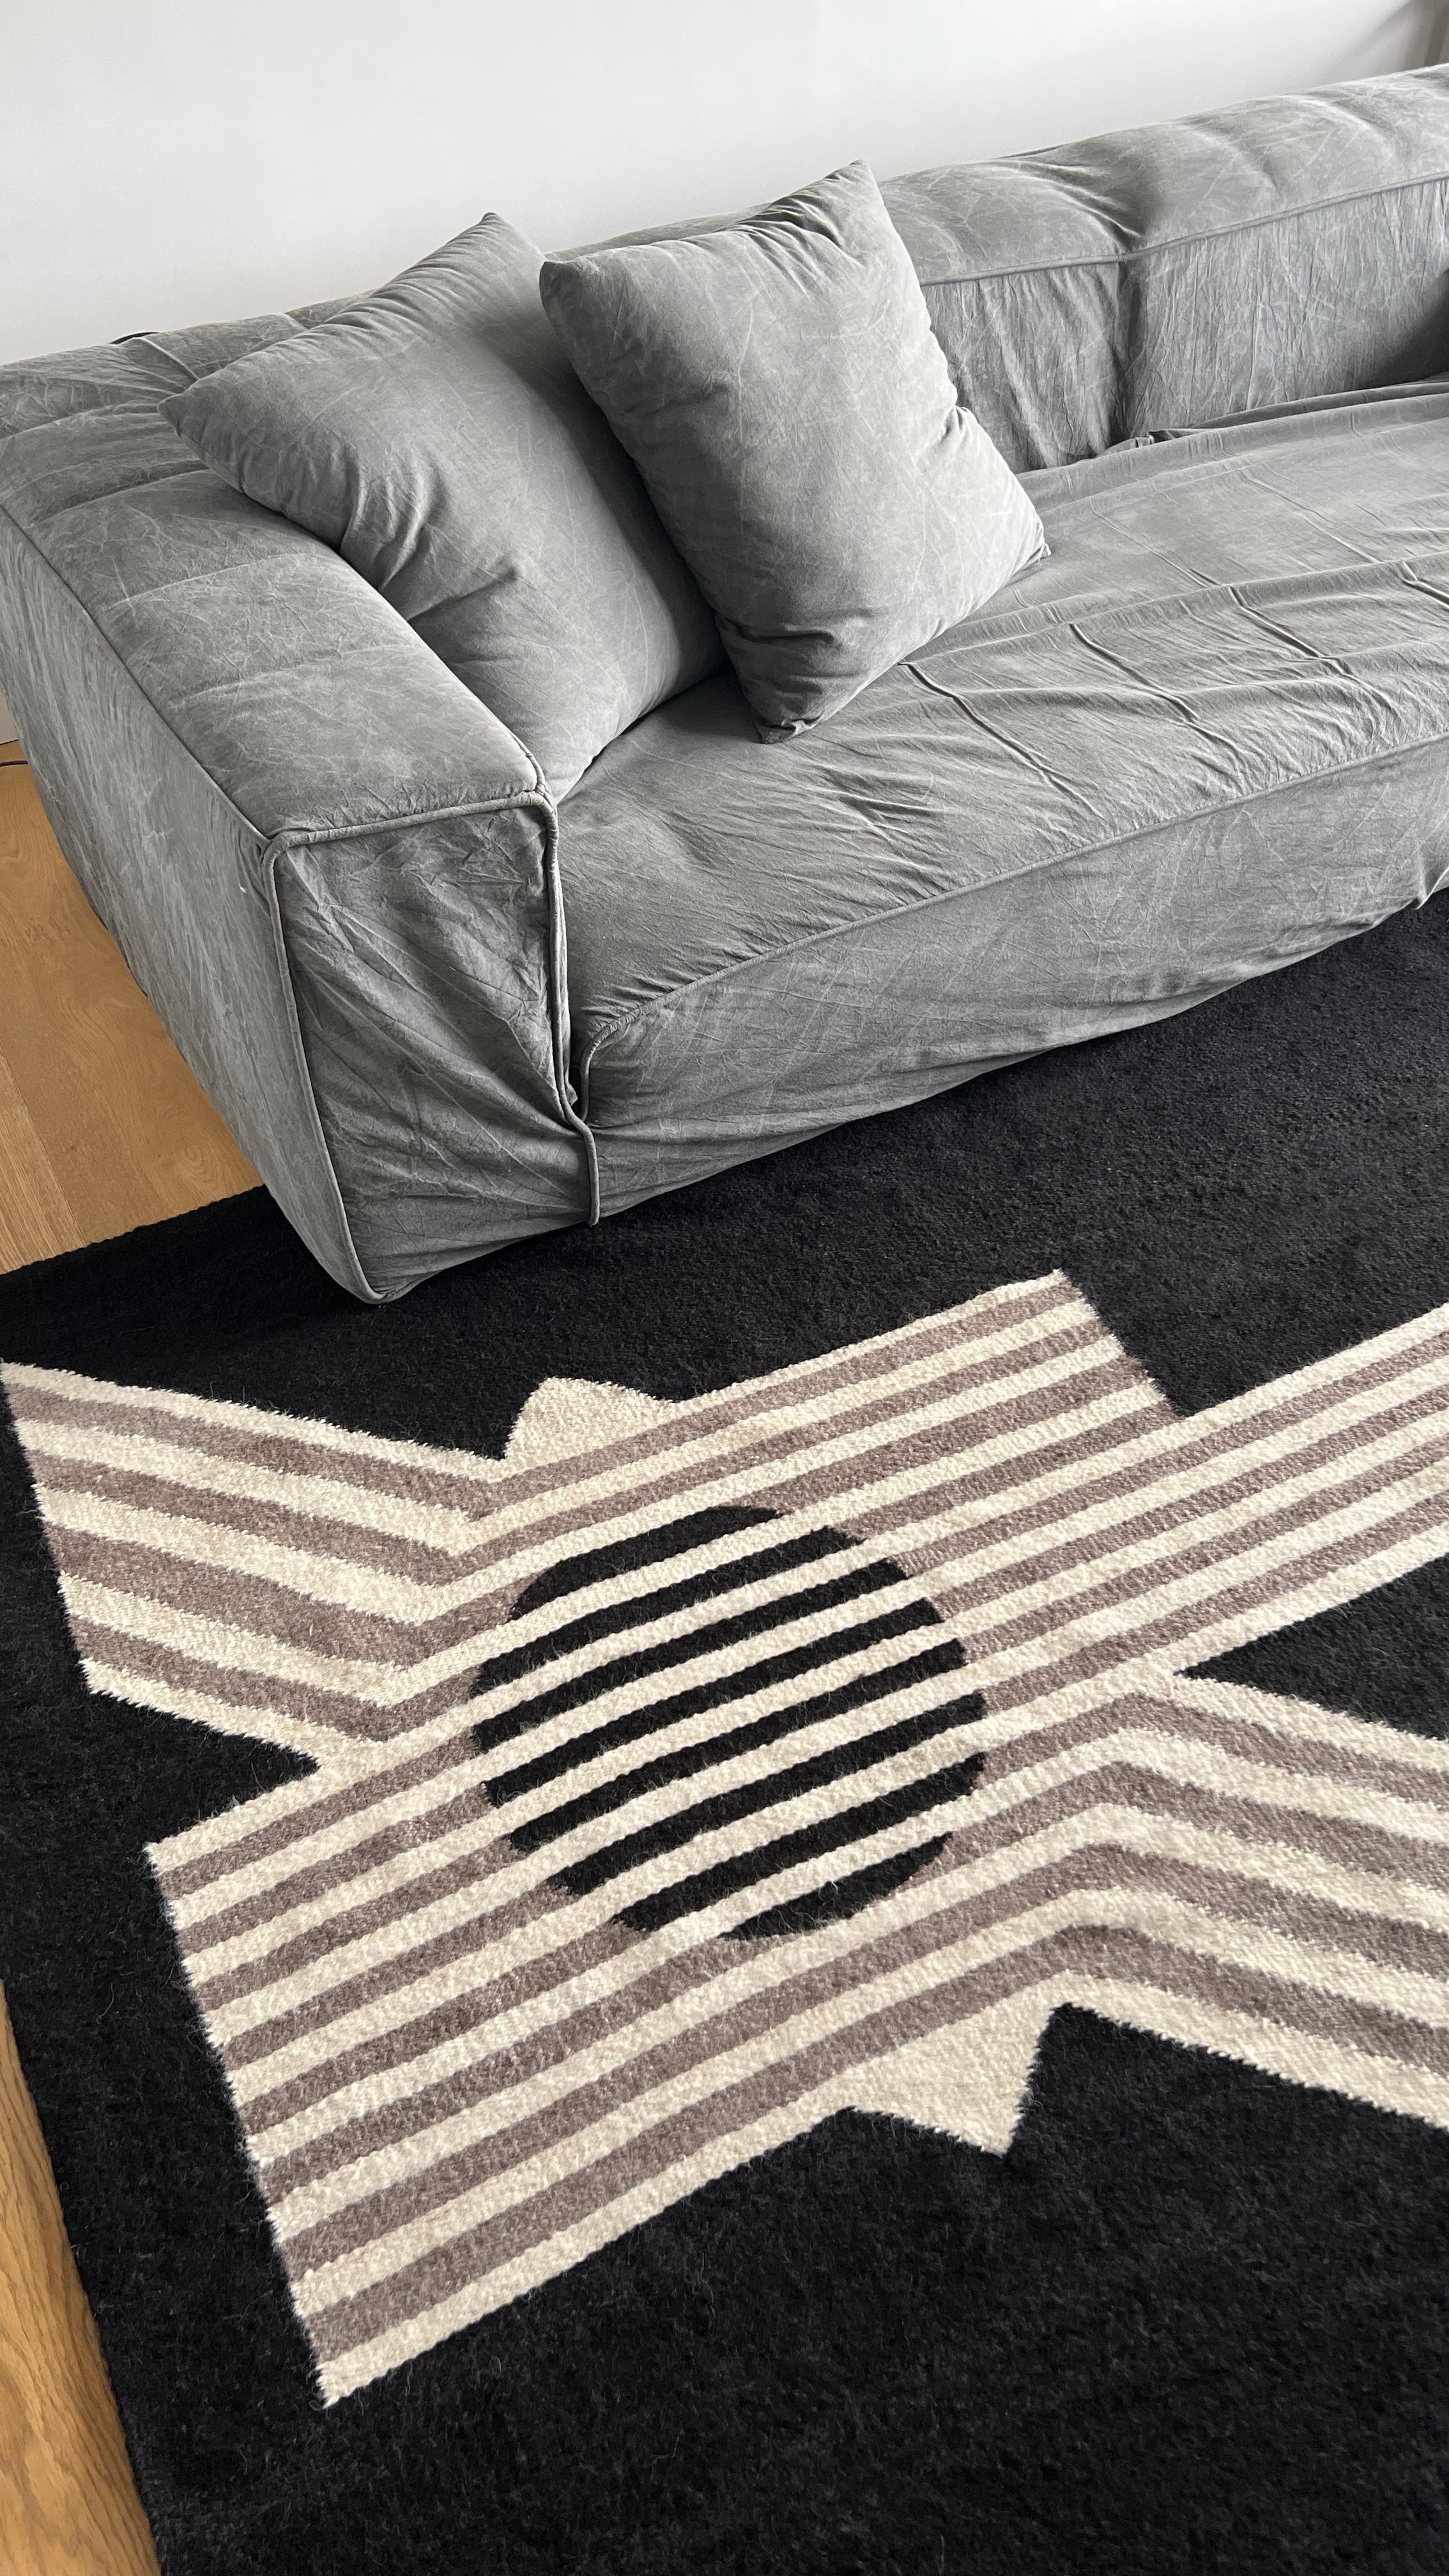 Adapted from the original artwork by Ary Brizzi, Untitled, 1958. 

Limited edition of 15 handmade and unique rugs.

LALANA RUGS is an applied arts initiative born from the desire to combine proposals by contemporary artists with traditional local